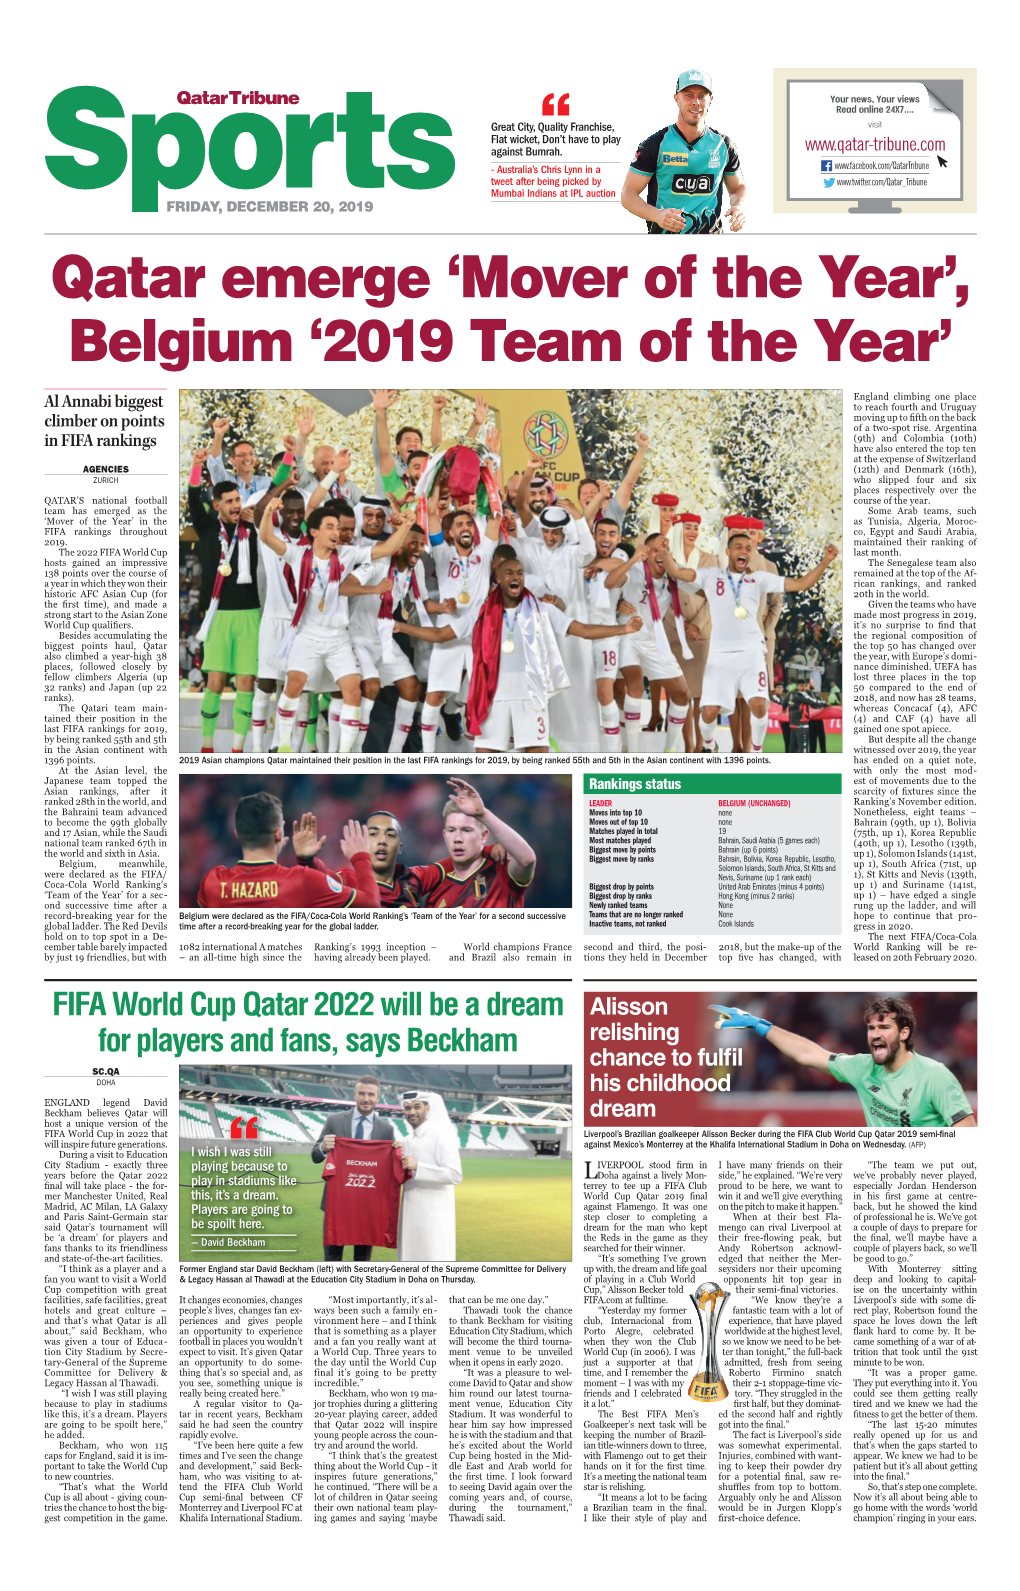 Qatar Emerge 'Mover of the Year', Belgium '2019 Team of the Year'